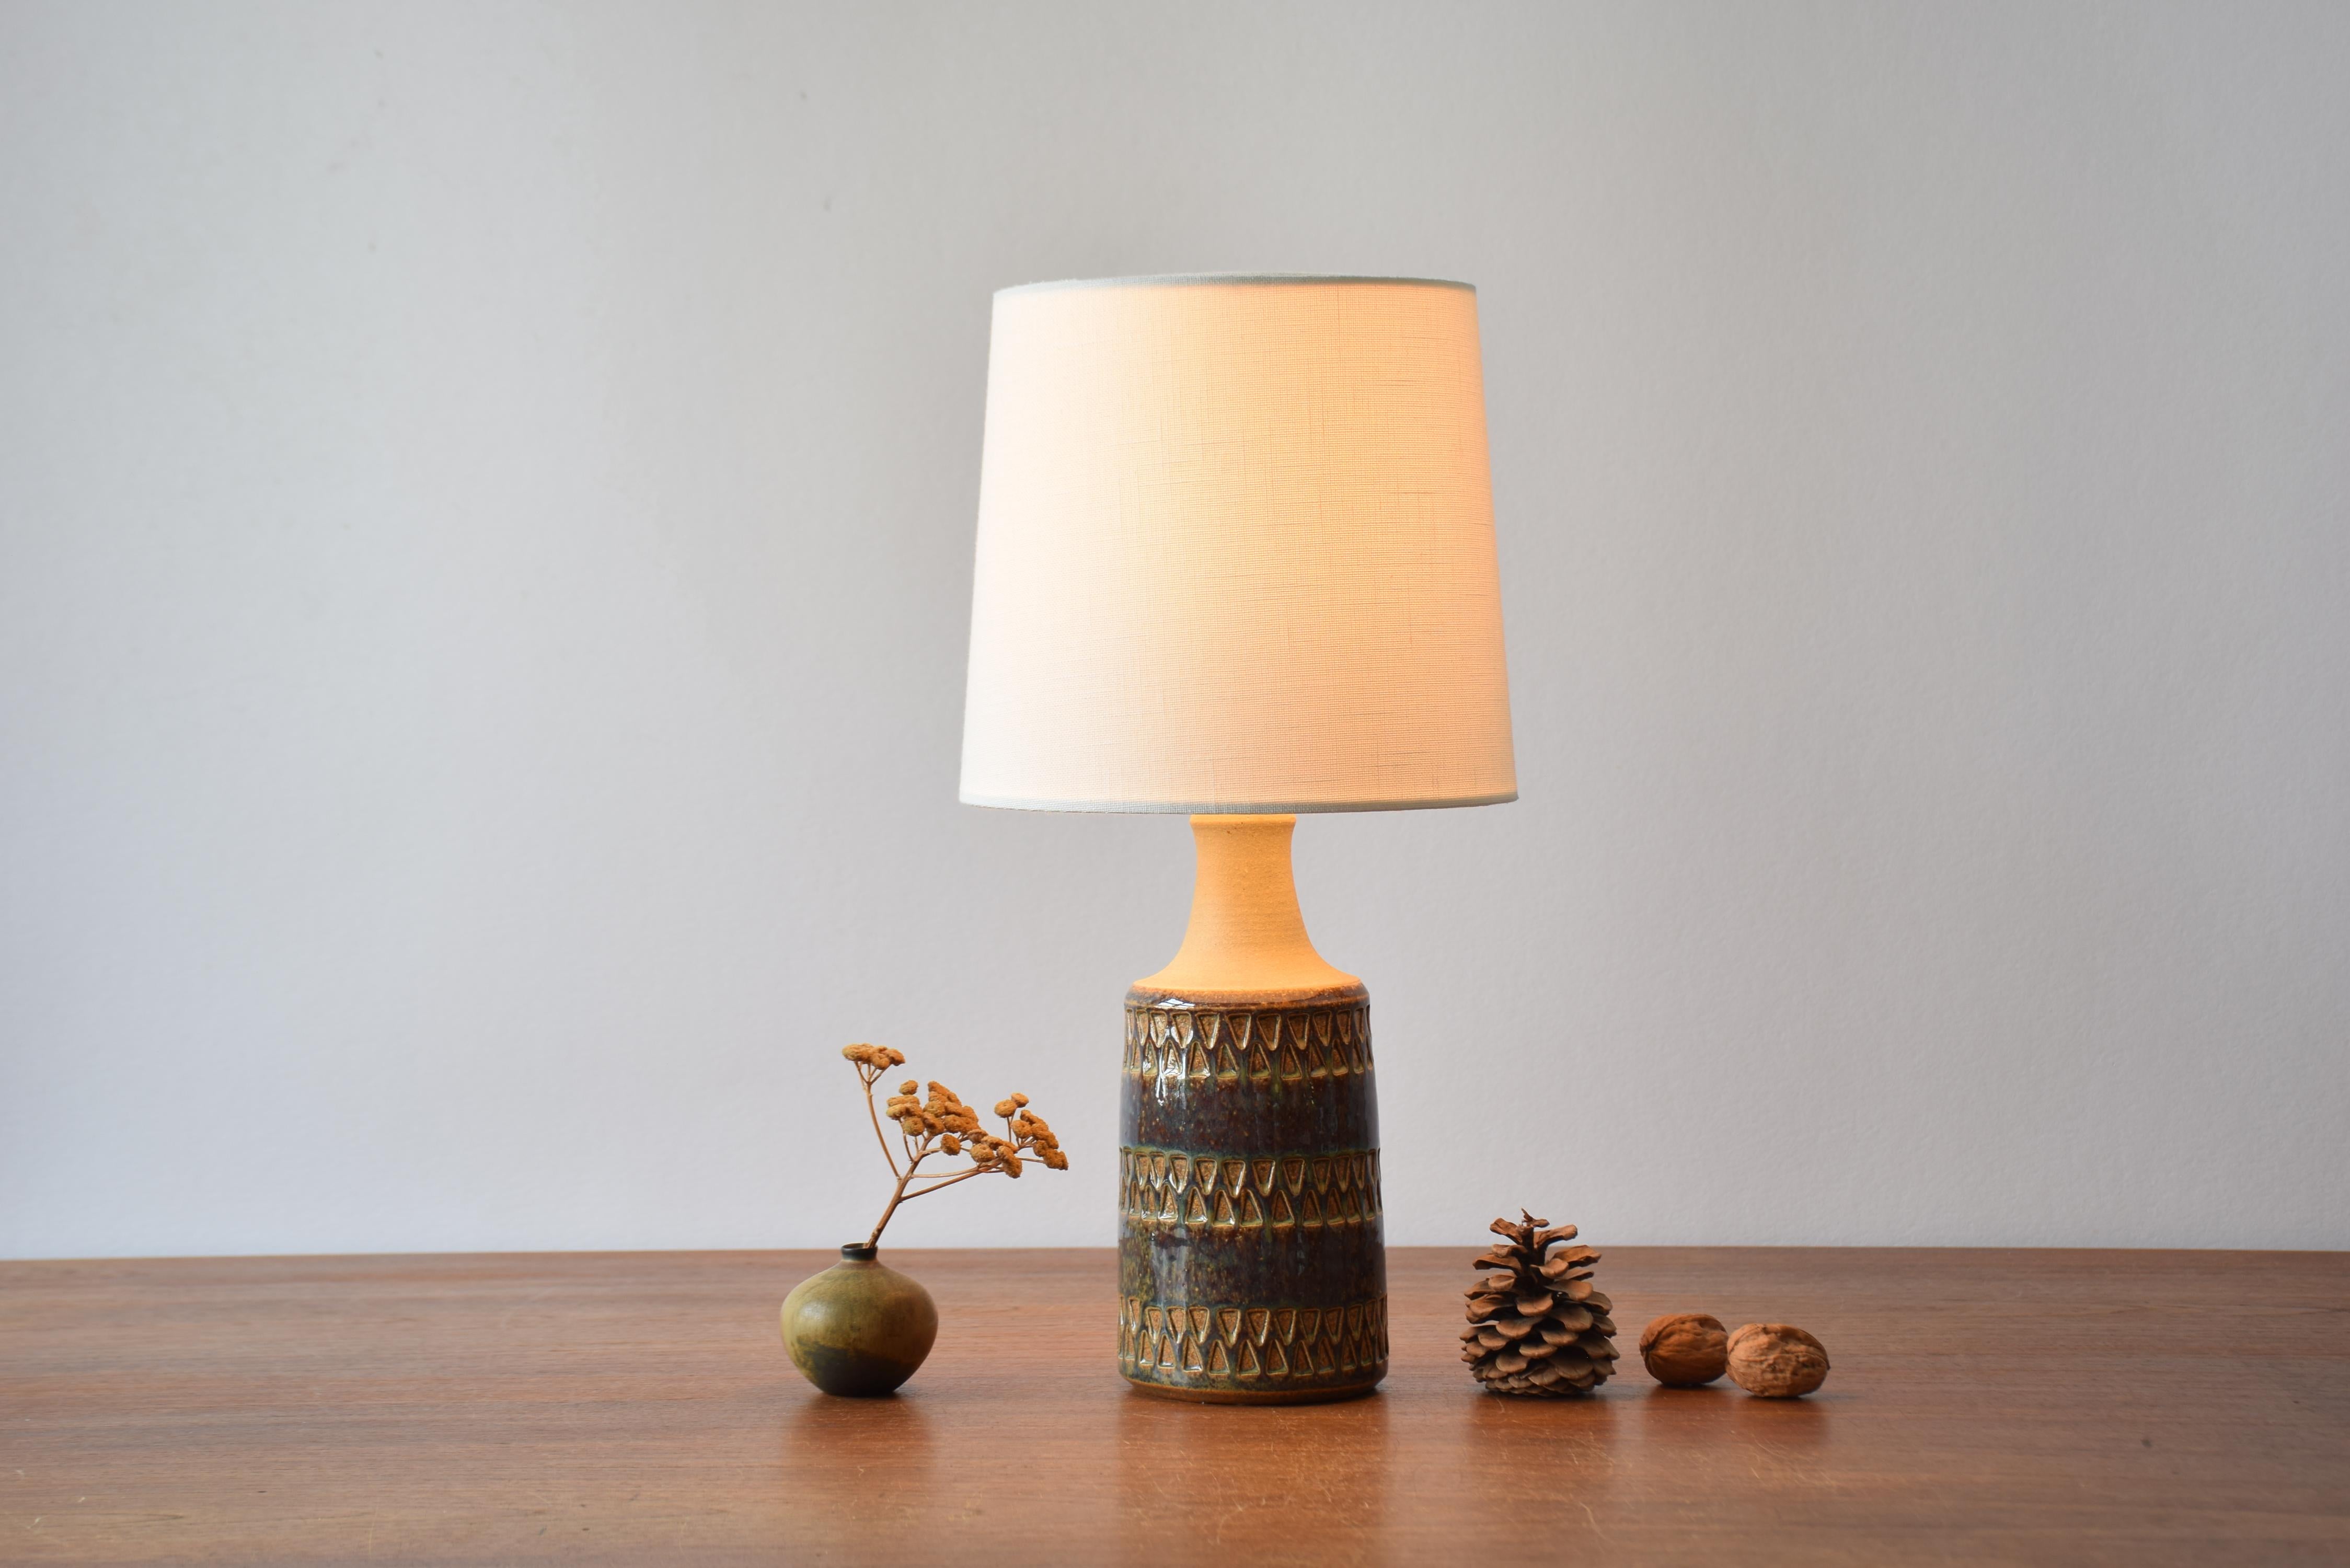 Small Midcentury Danish table lamp by Søholm Stentøj, Denmark. Made circa 1960s.
It is decorated with a mix of brown, blue and caramel colored glaze on a repeated triangle decor. 

Included is a new lamp shade designed and made in Denmark. It is